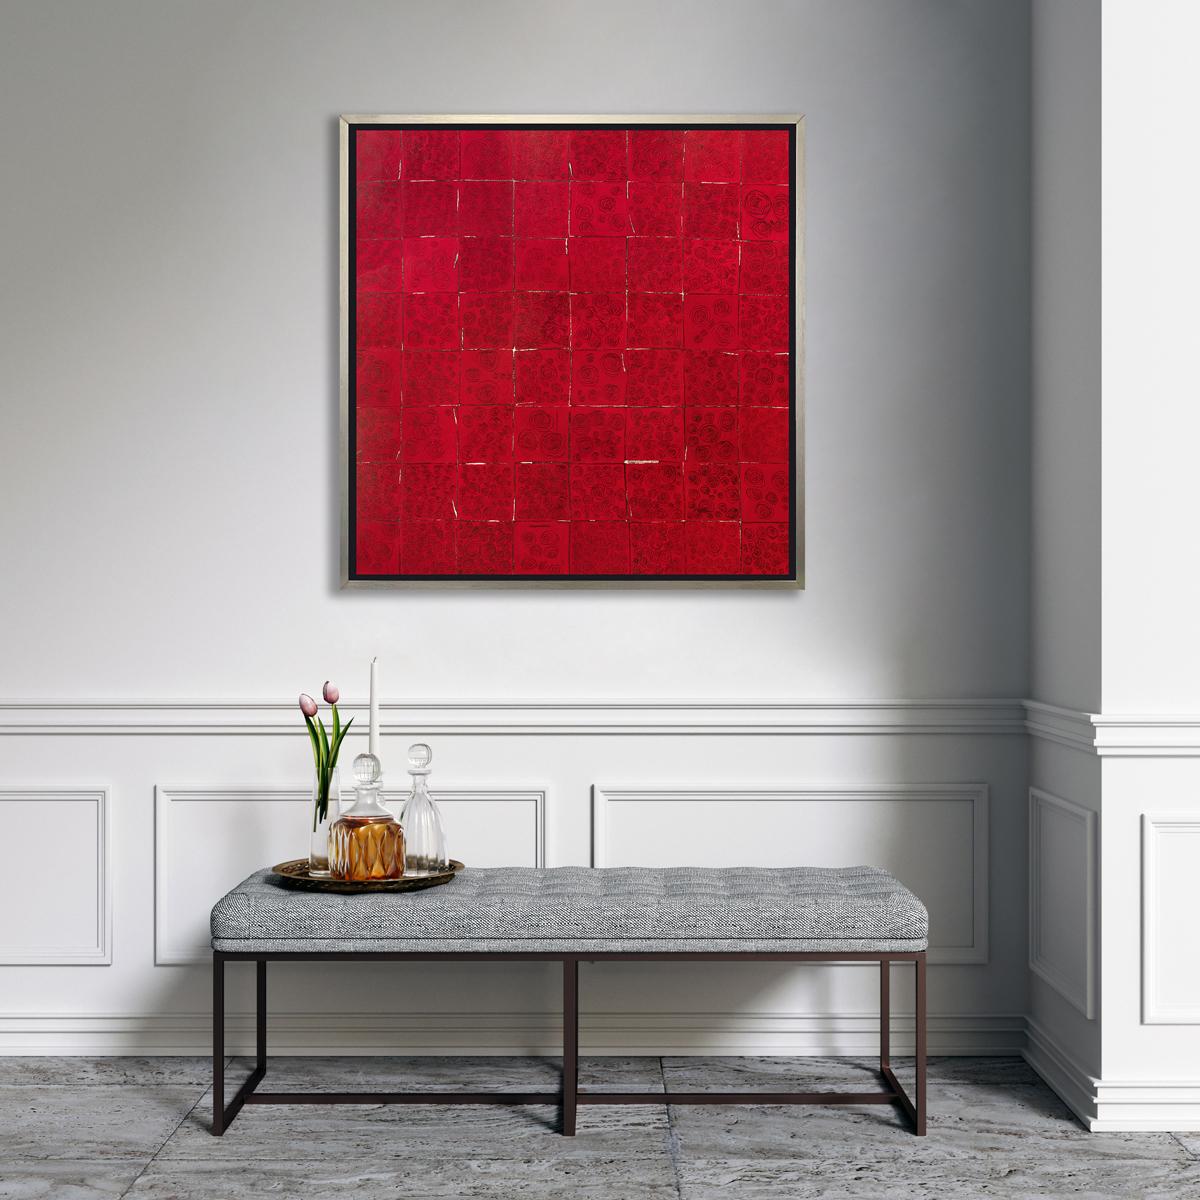 This abstract limited edition print by Sofie Swann features a square pattern composition in a deep red color, with abstracted, thin black line drawings of roses within each square. The square outlines are mostly dark, with a few streaks of white